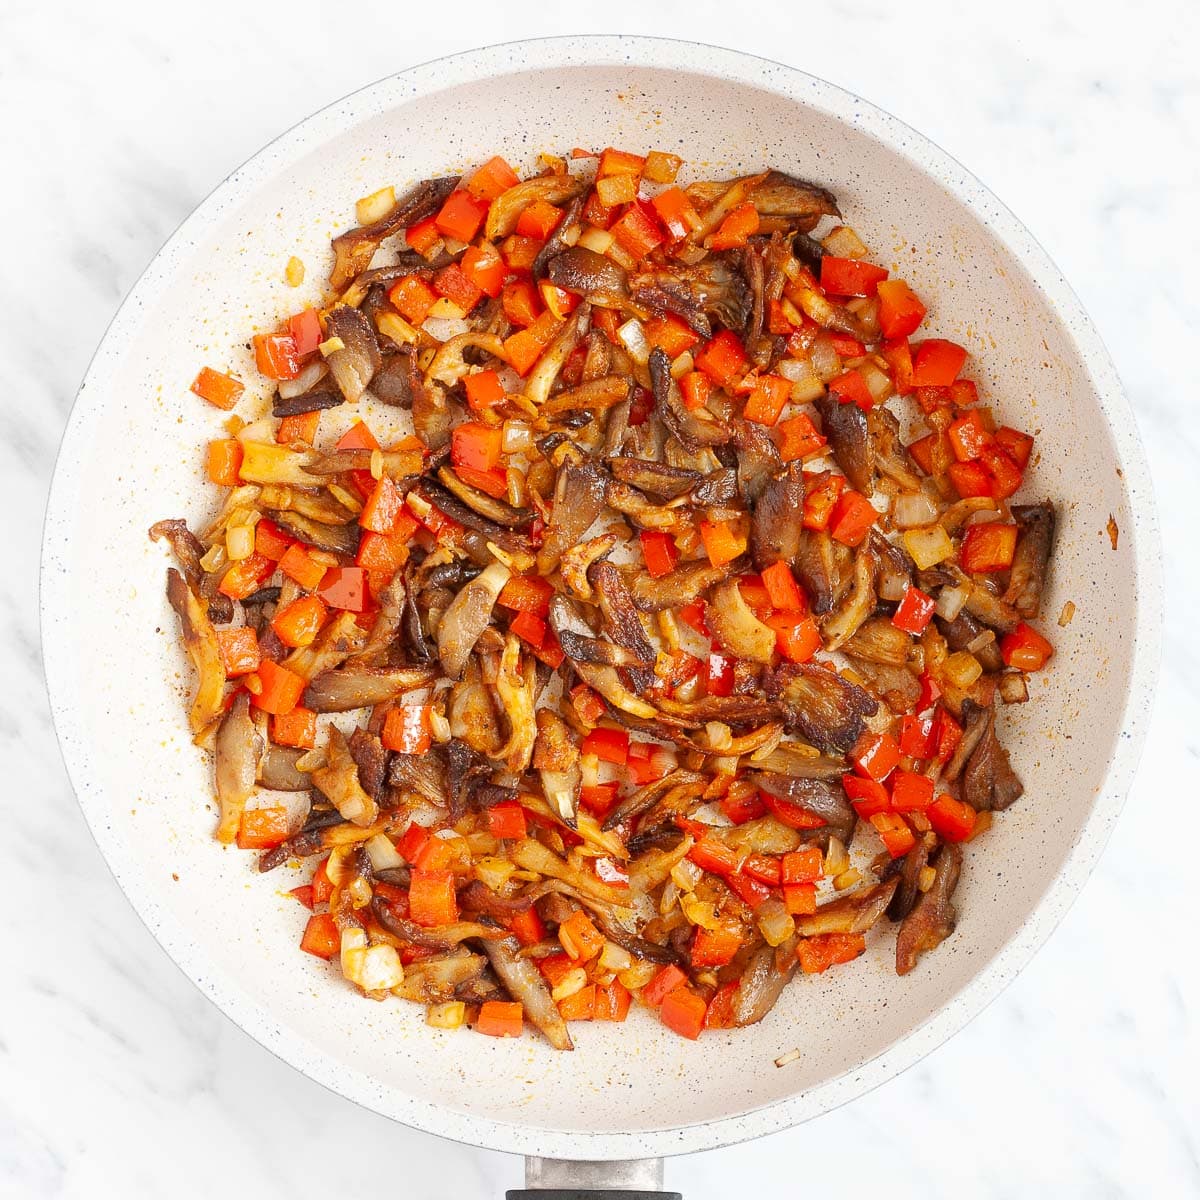 Crispy pan-fried chopped red pepper, onion, and mushroom shreds in a white frying pan